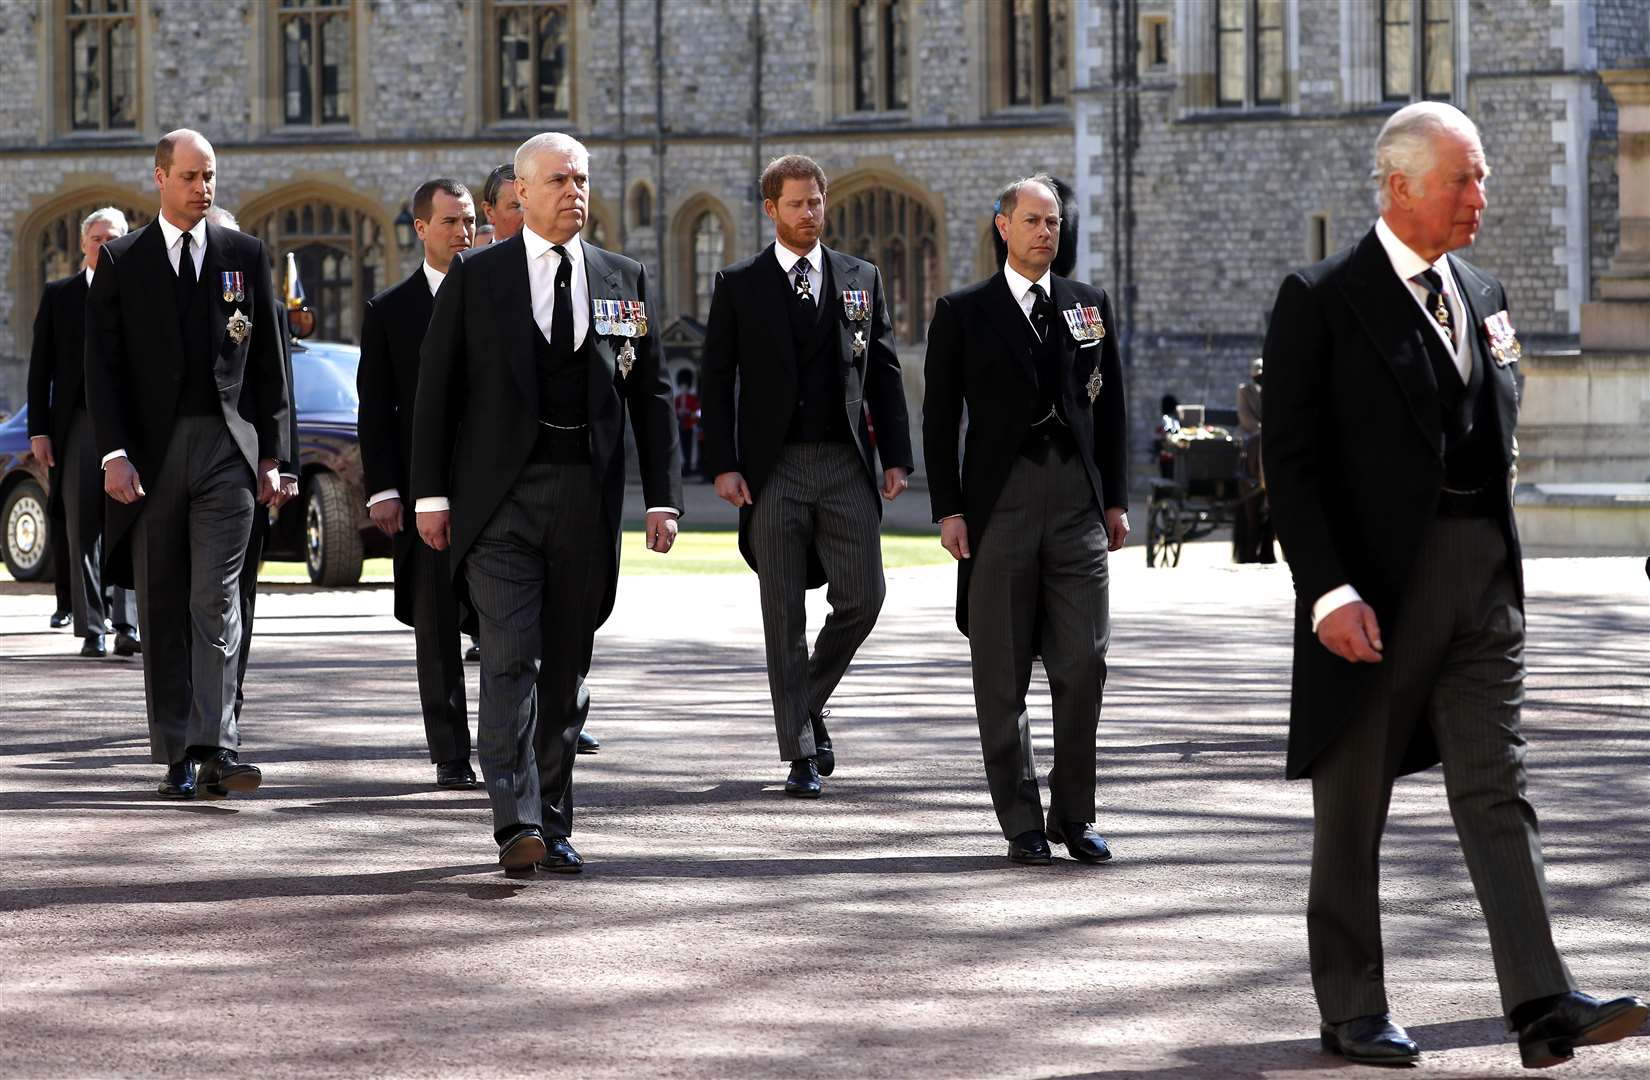 The Duke of Cambridge, the Duke of York, the Duke of Sussex, the Earl of Wessex and the Prince of Wales during the funeral of the Duke of Edinburgh at Windsor Castle (Alastair Grant/PA)